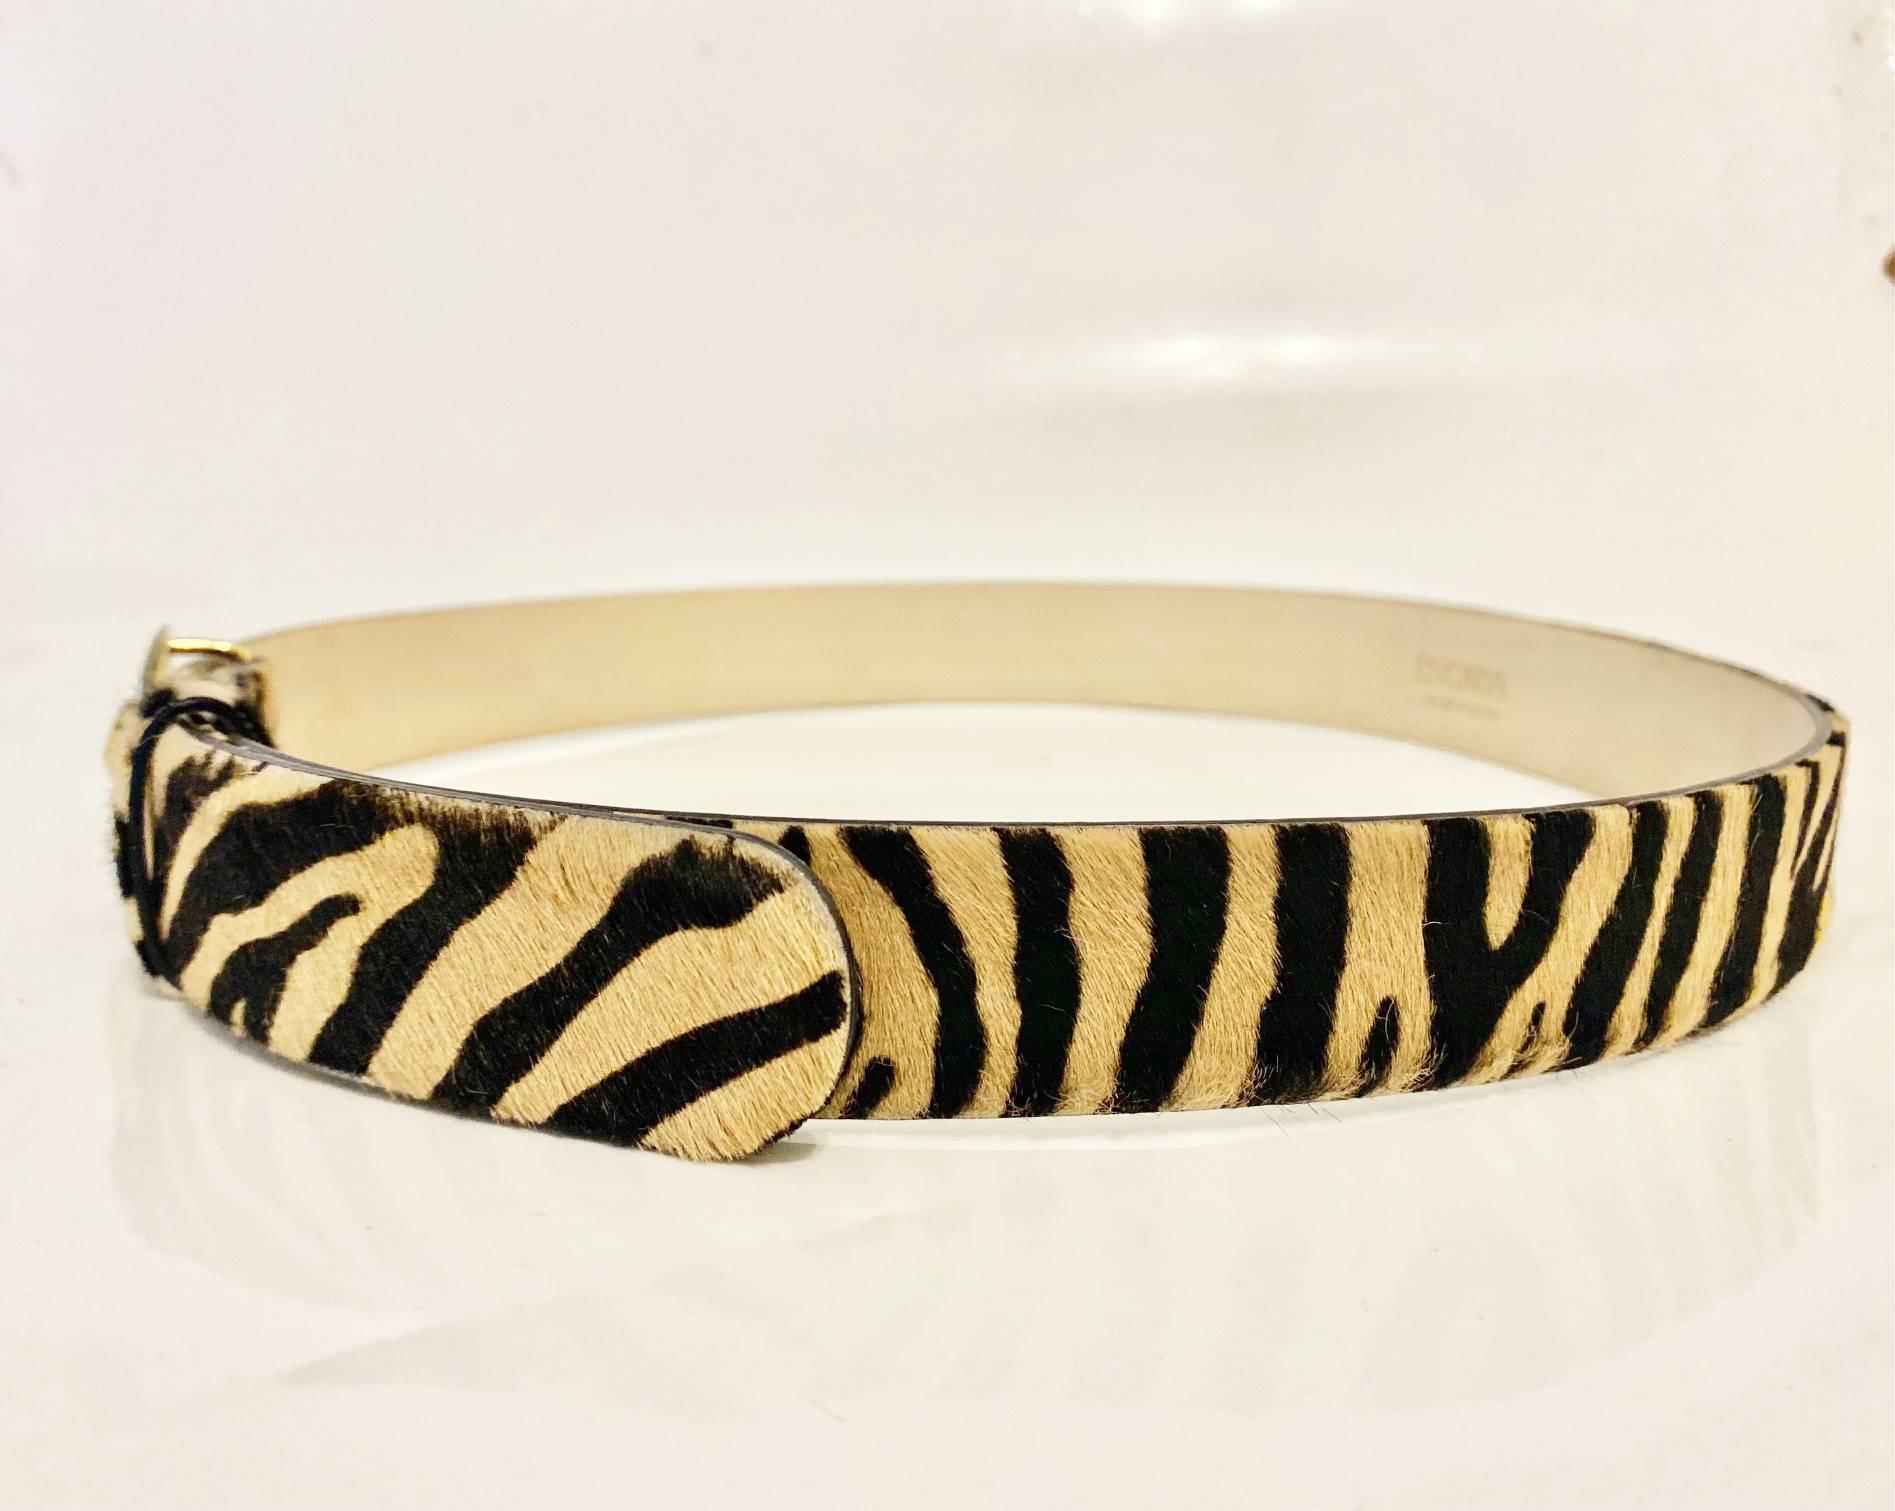 1980s Escada Pony Animal Print Belt with Gold Leopard Charm Buckle For Sale 1